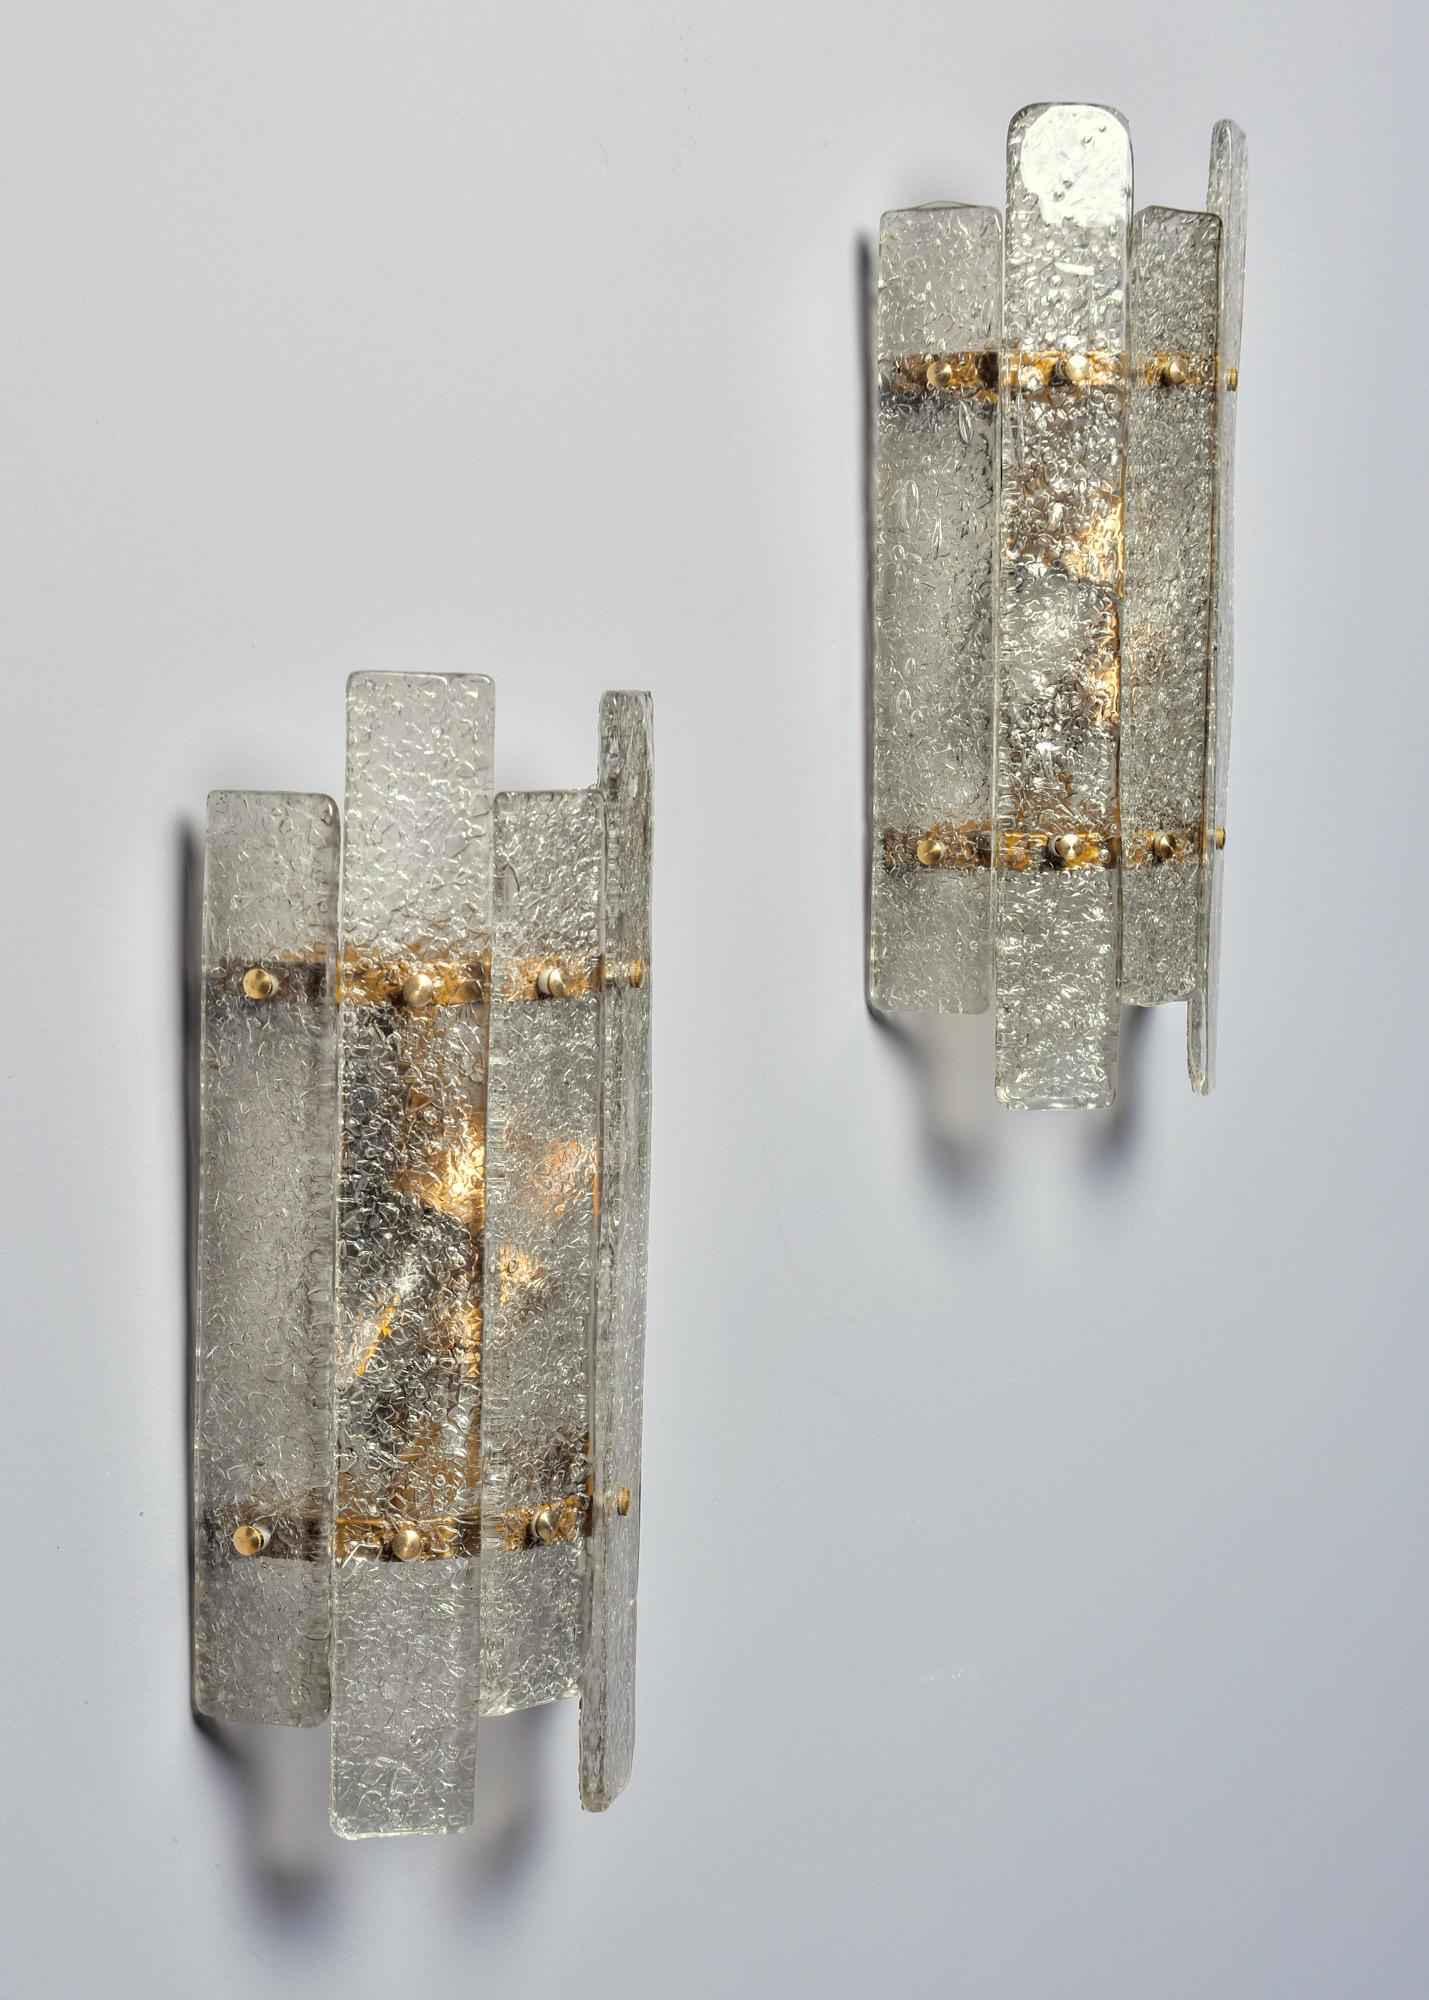 Made in Italy, these Deco style sconces have shades comprised of clear textured glass slats and brass hardware. Two standard sized sockets each. Sold and priced as a pair.